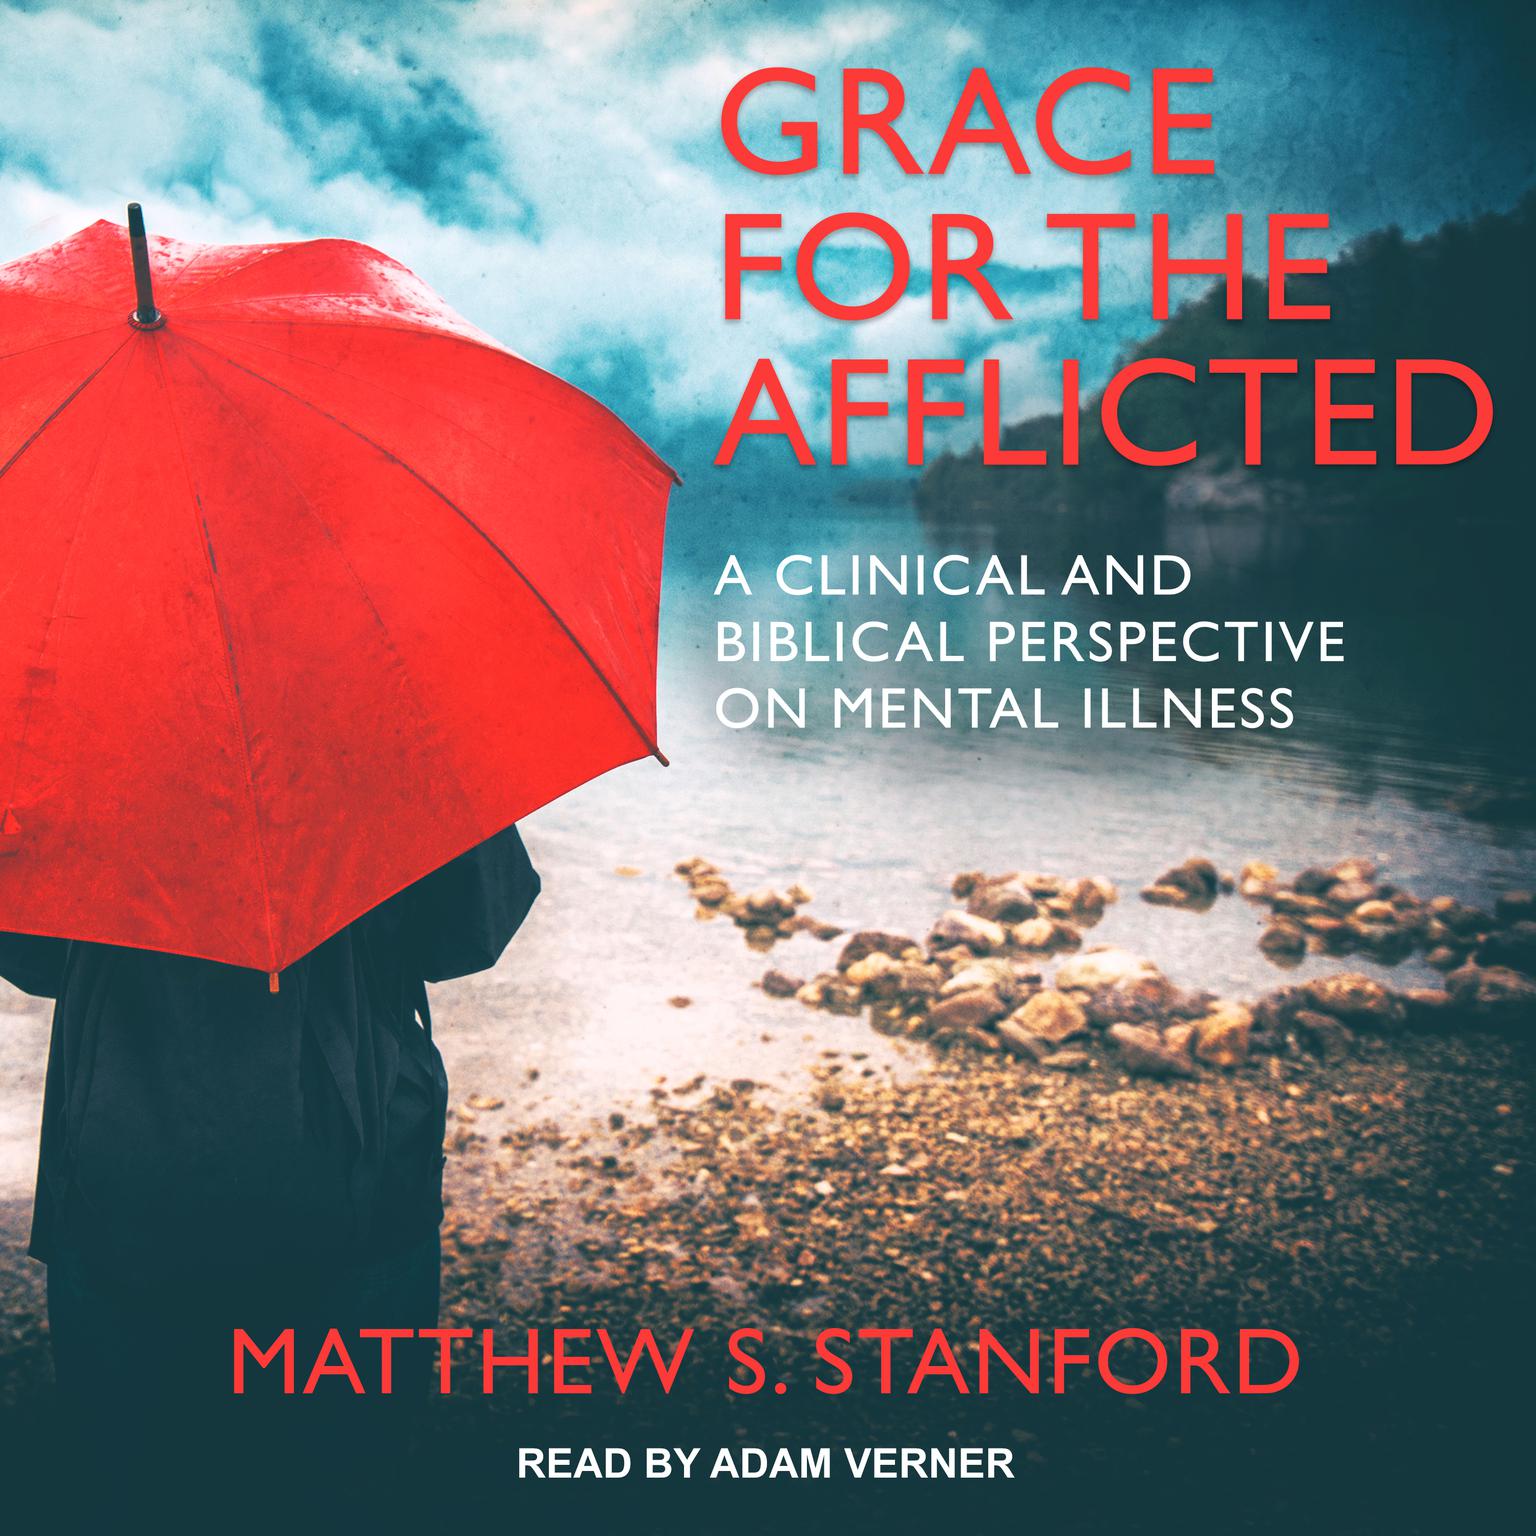 Grace for the Afflicted: A Clinical and Biblical Perspective on Mental Illness Audiobook, by Matthew S. Stanford